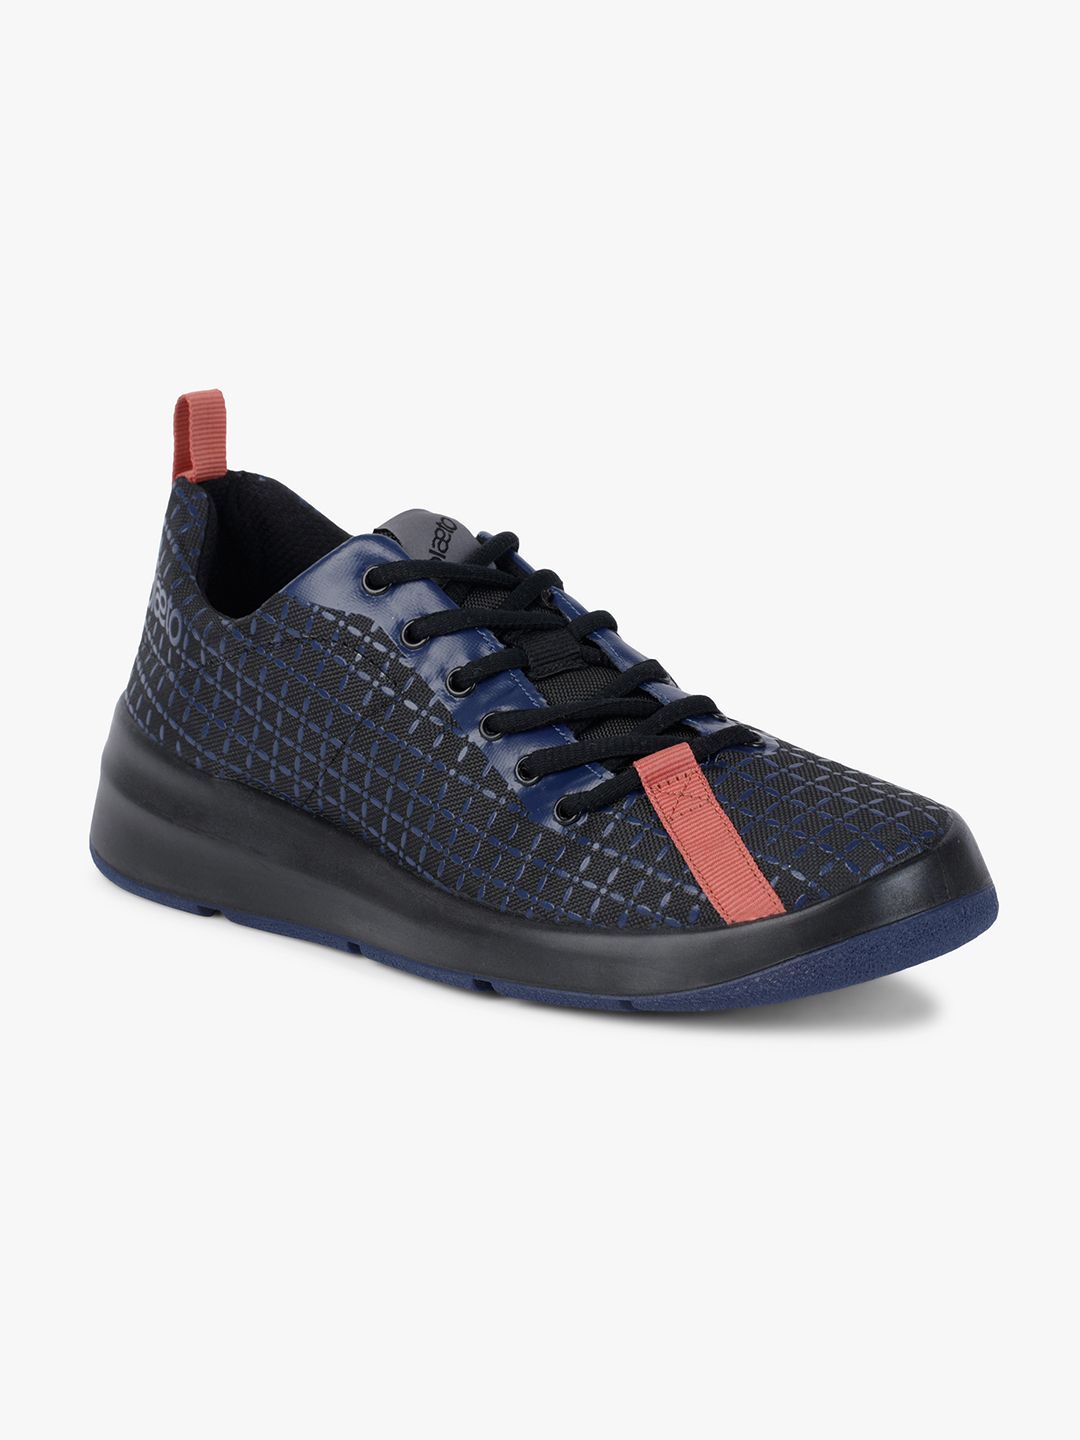 plaeto Women Black & Navy Blue Riff Non-Marking Running Sports Shoes Price in India